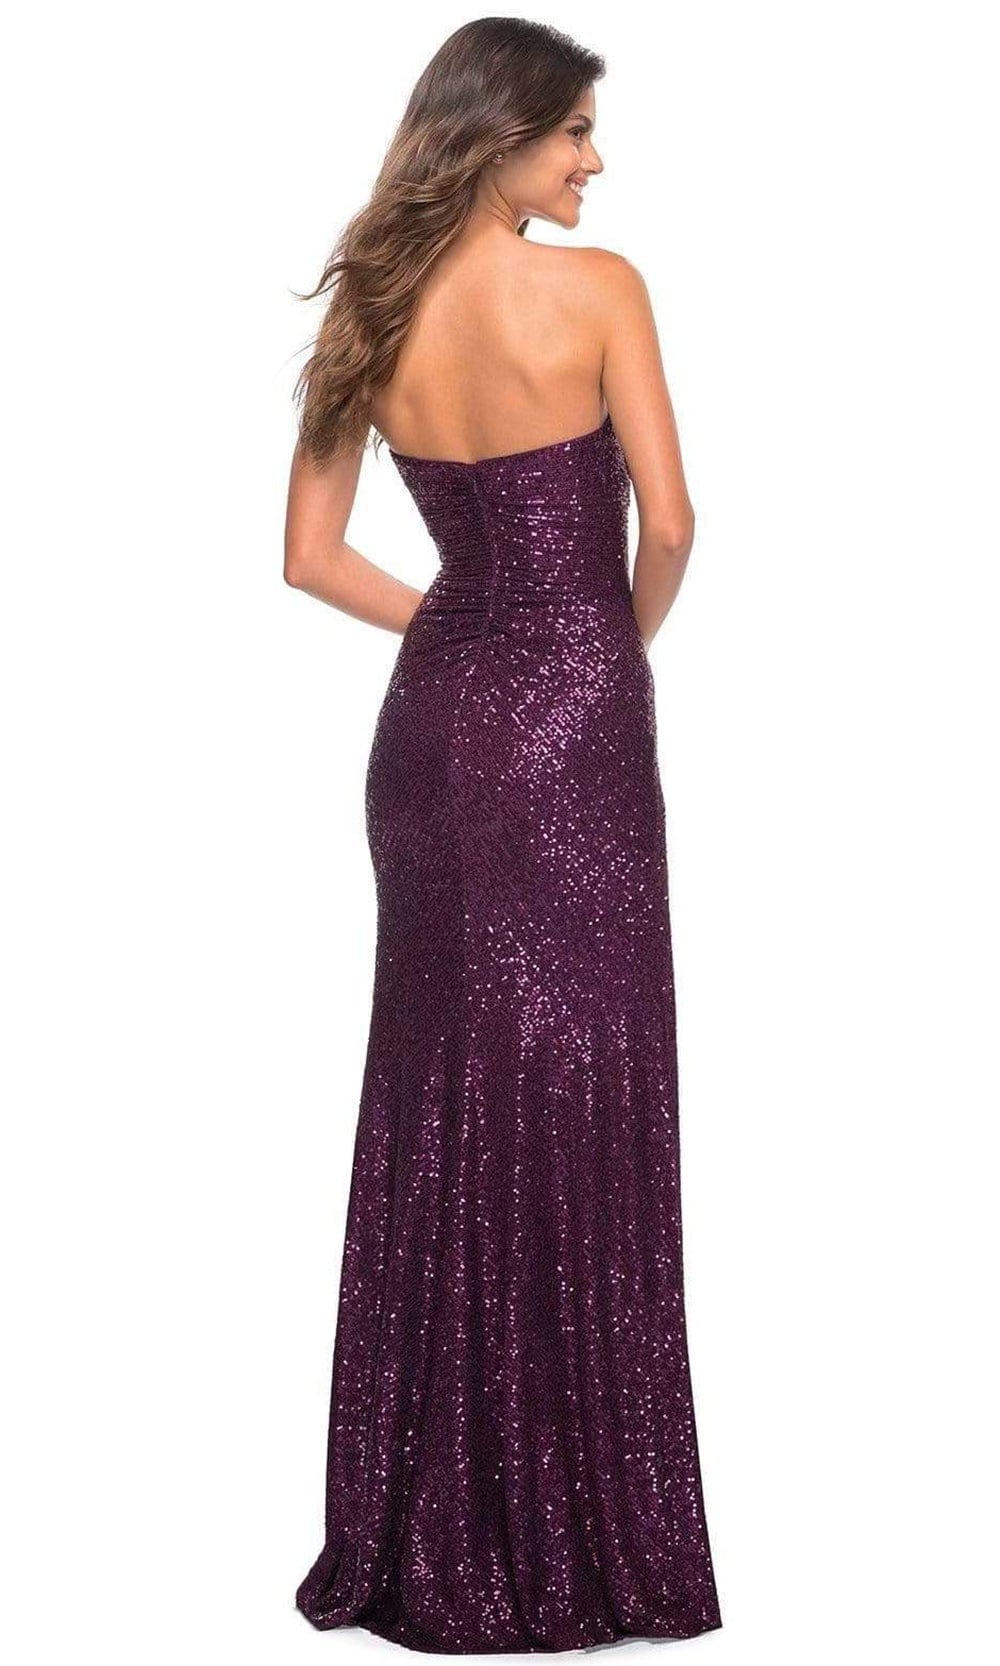 La Femme - 29675 Ruched Sequin Gown with Slit Prom Dresses